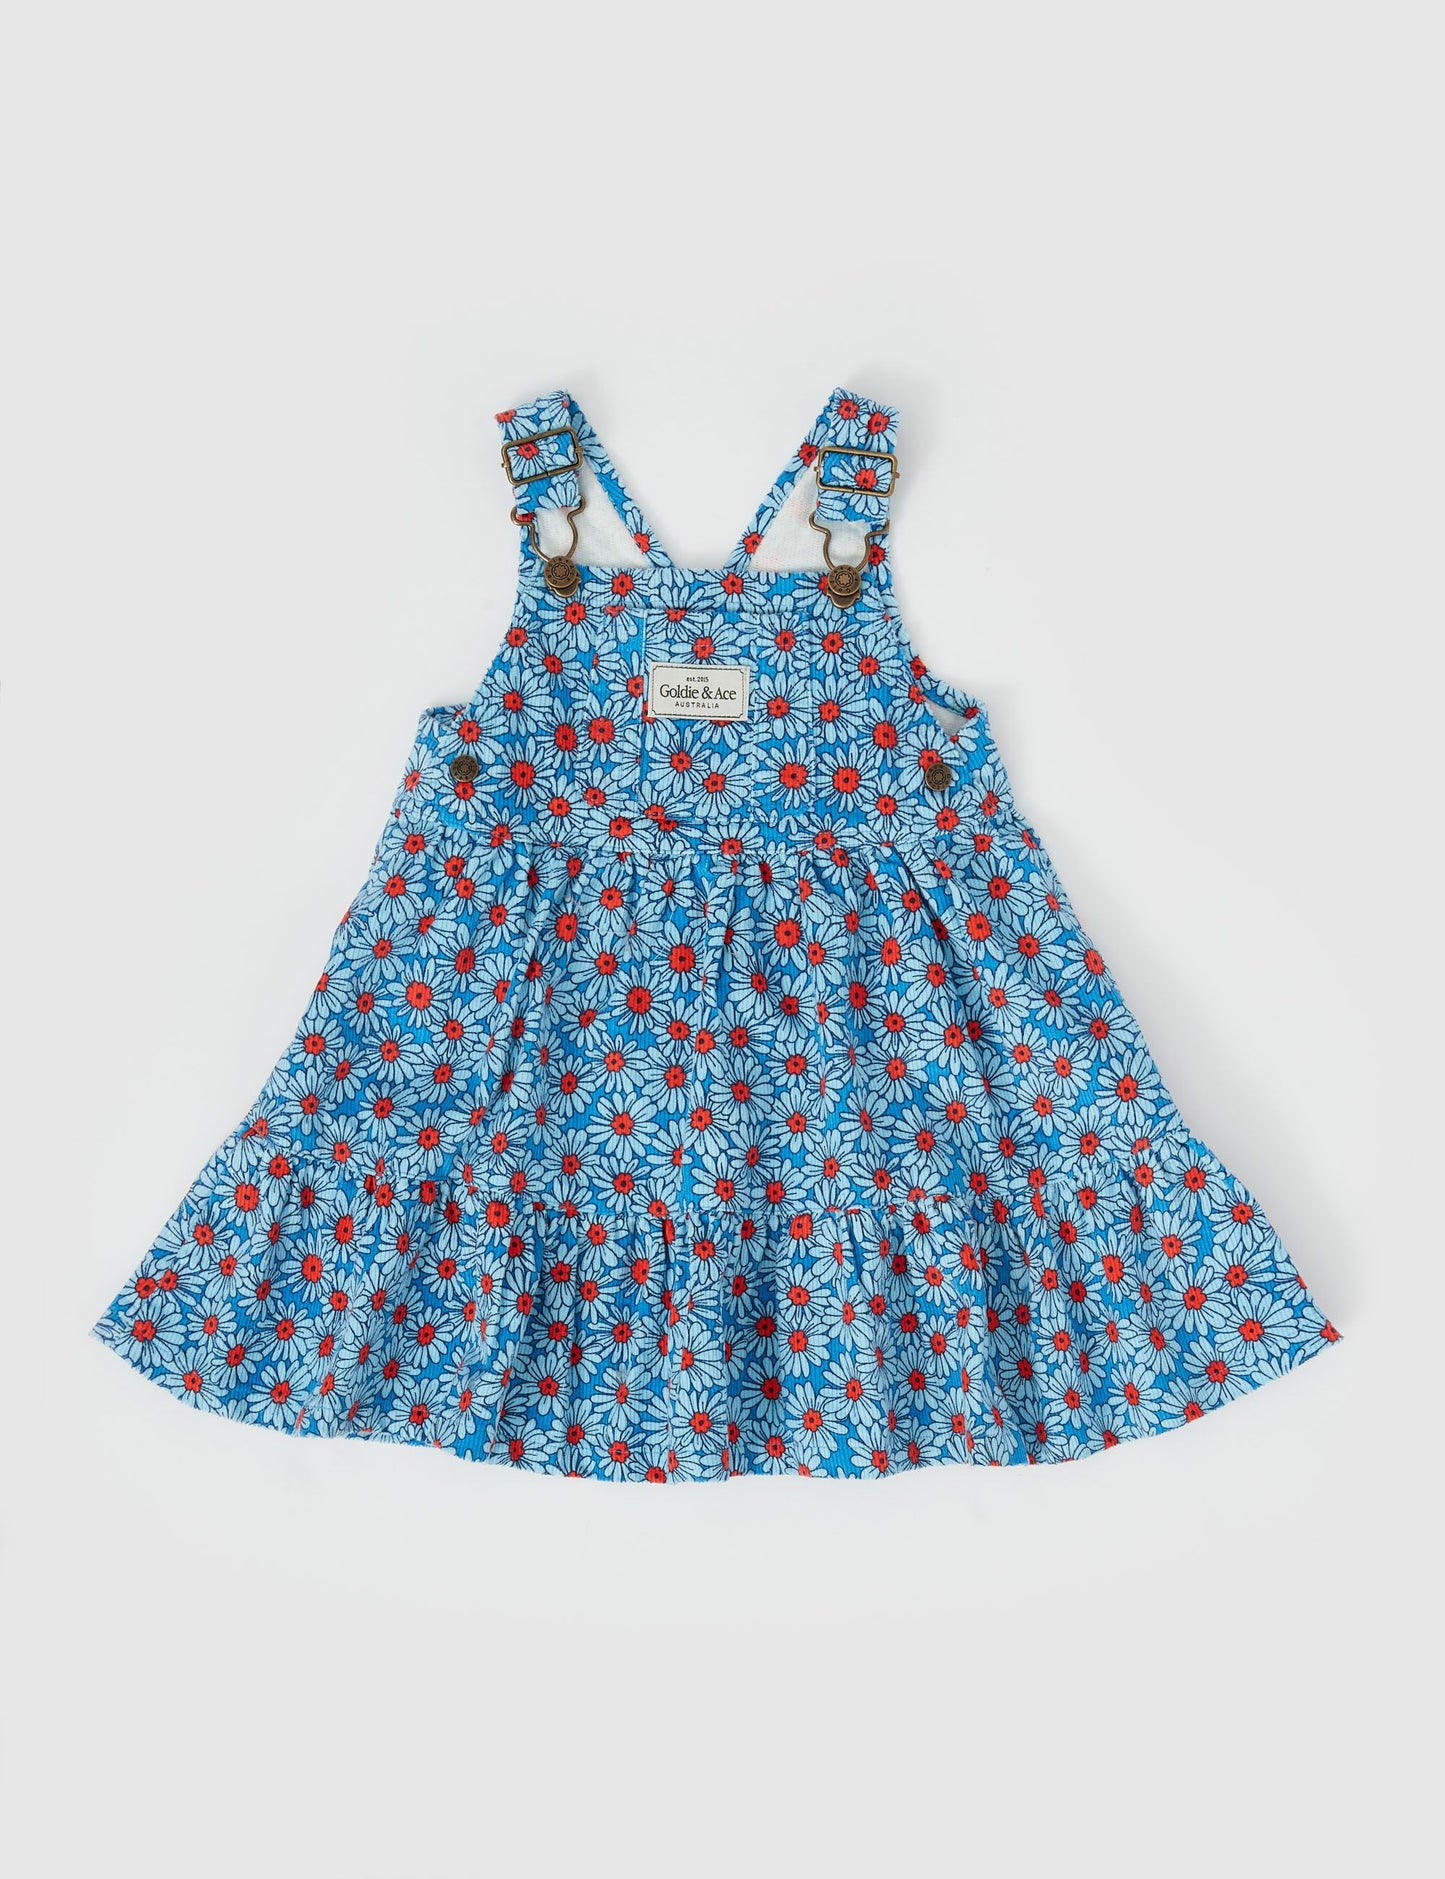 Goldie + Ace - Dixie Daisy Tiered Corduroy Pinafore Dress (Blue/Red)